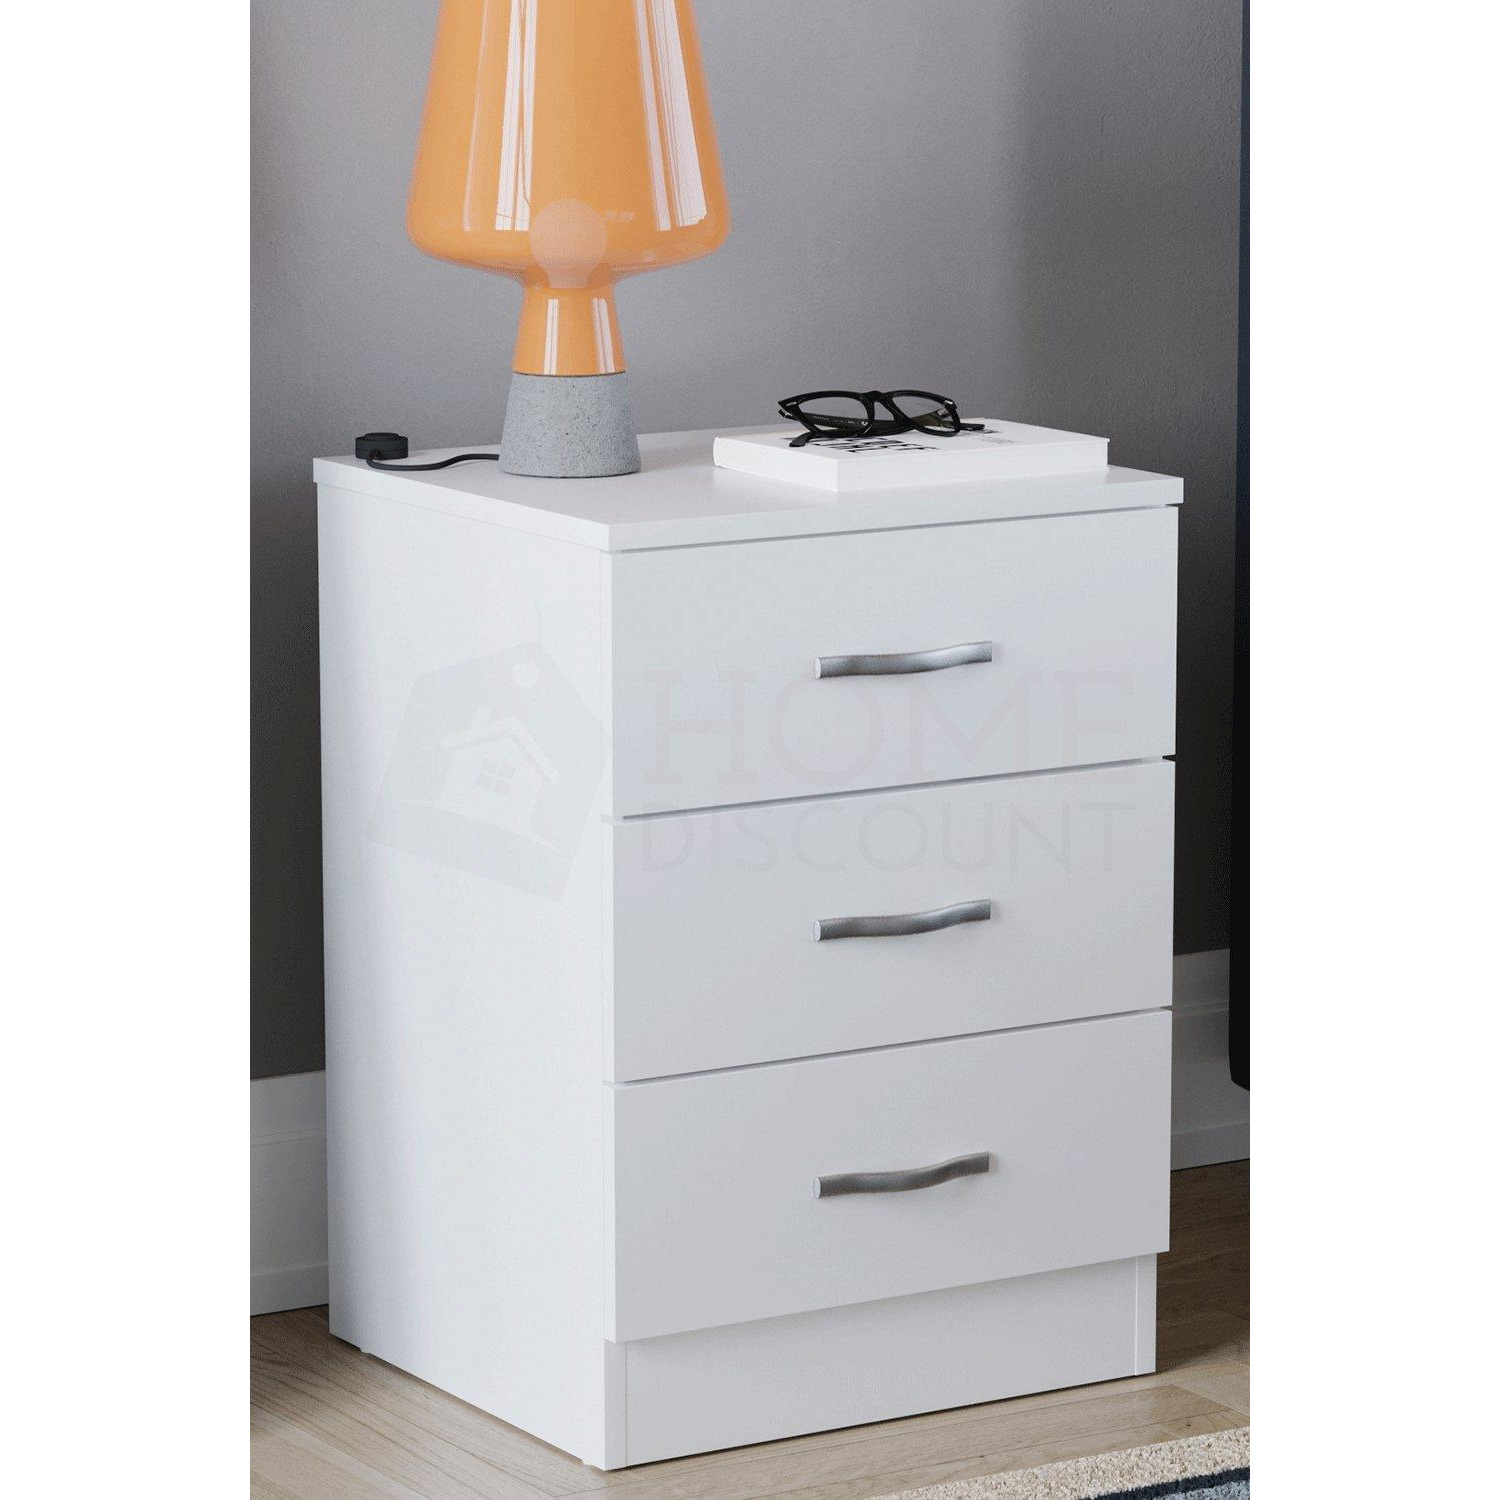 Vida Designs Riano 3 Drawer Bedside Cabinet Chest of Drawers Bedroom Furniture - image 1